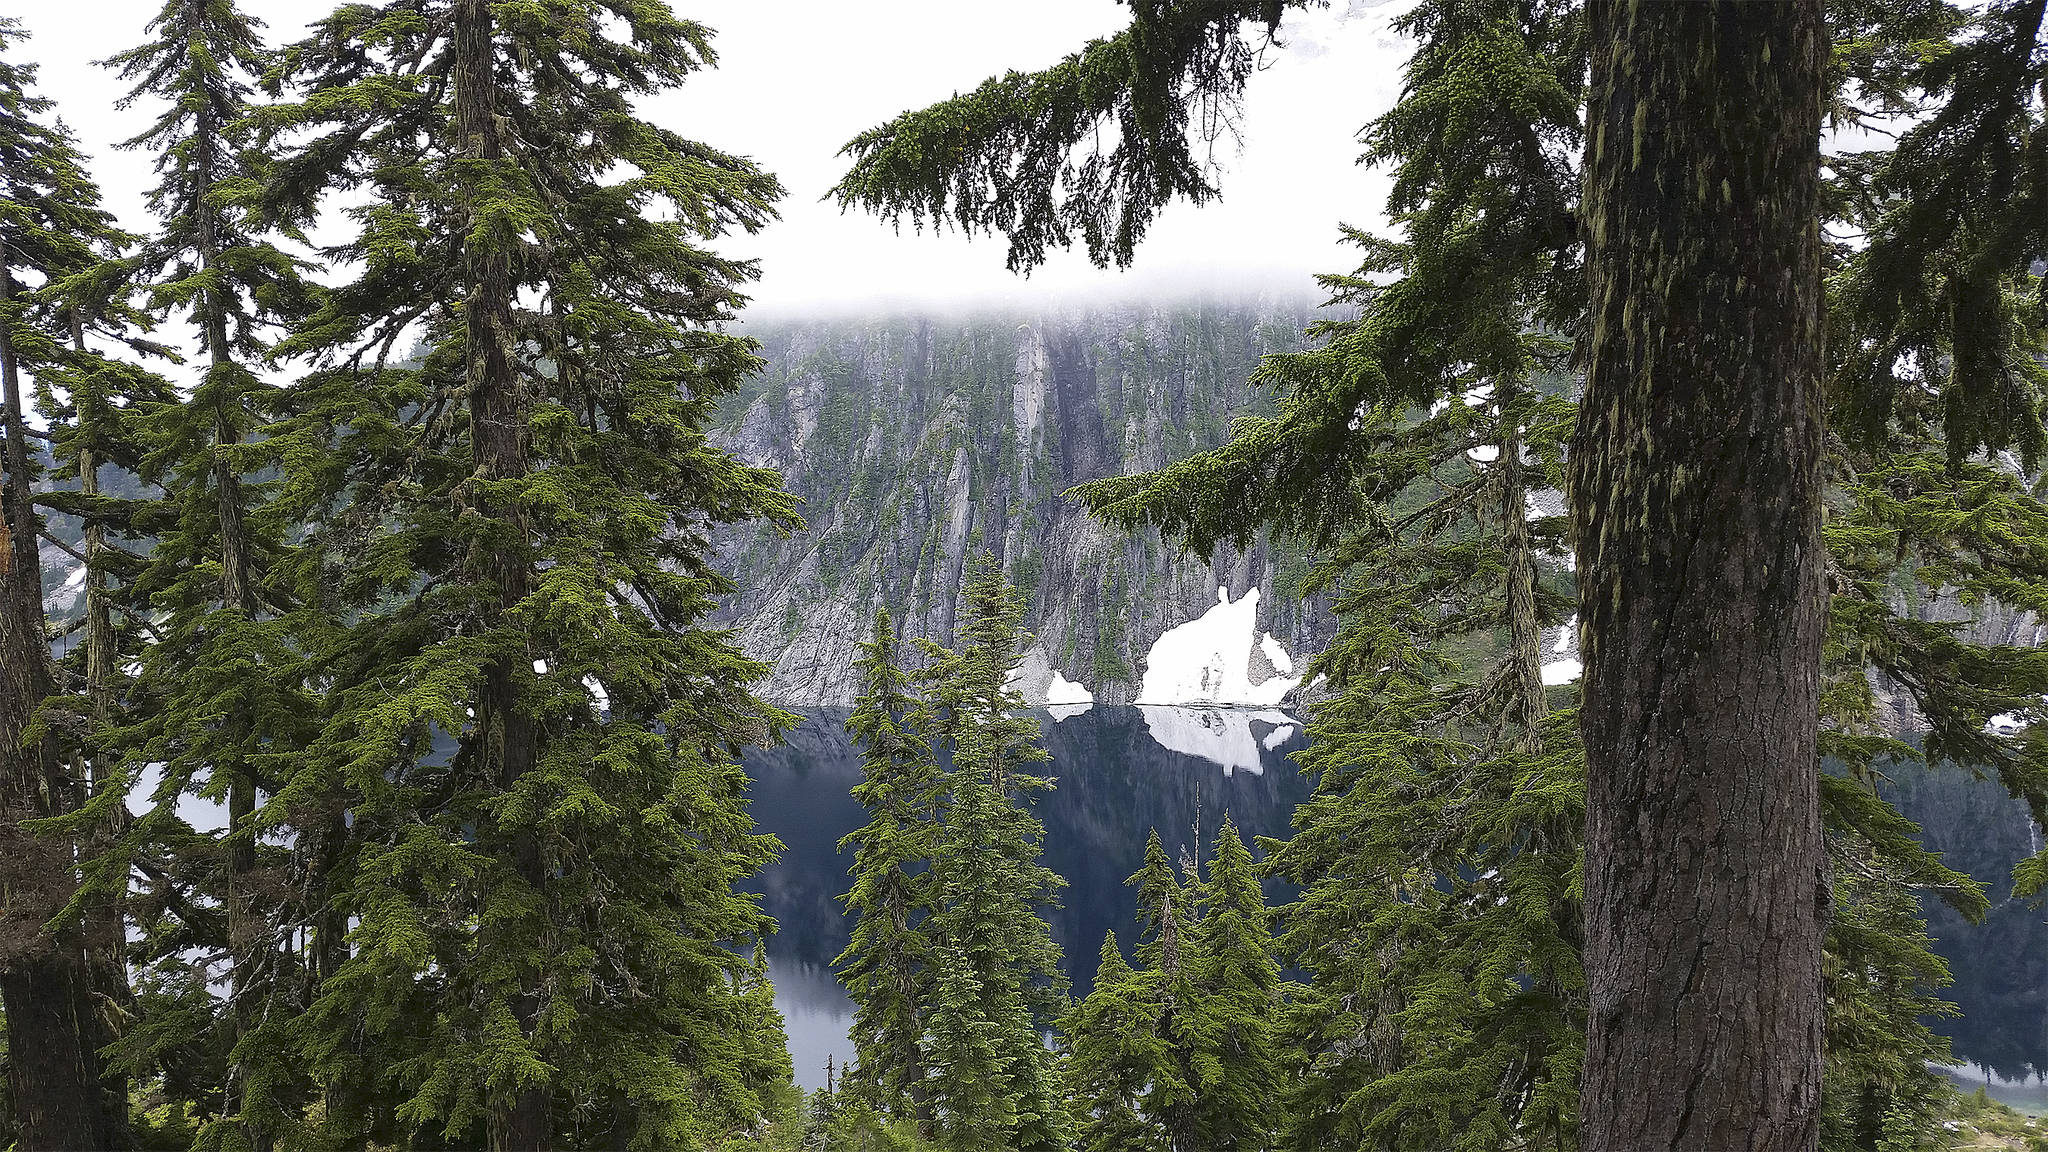 File photo
Snow Lake, located near Snoqualmie Pass in Mt. Baker-Snoqualmie National Forest.